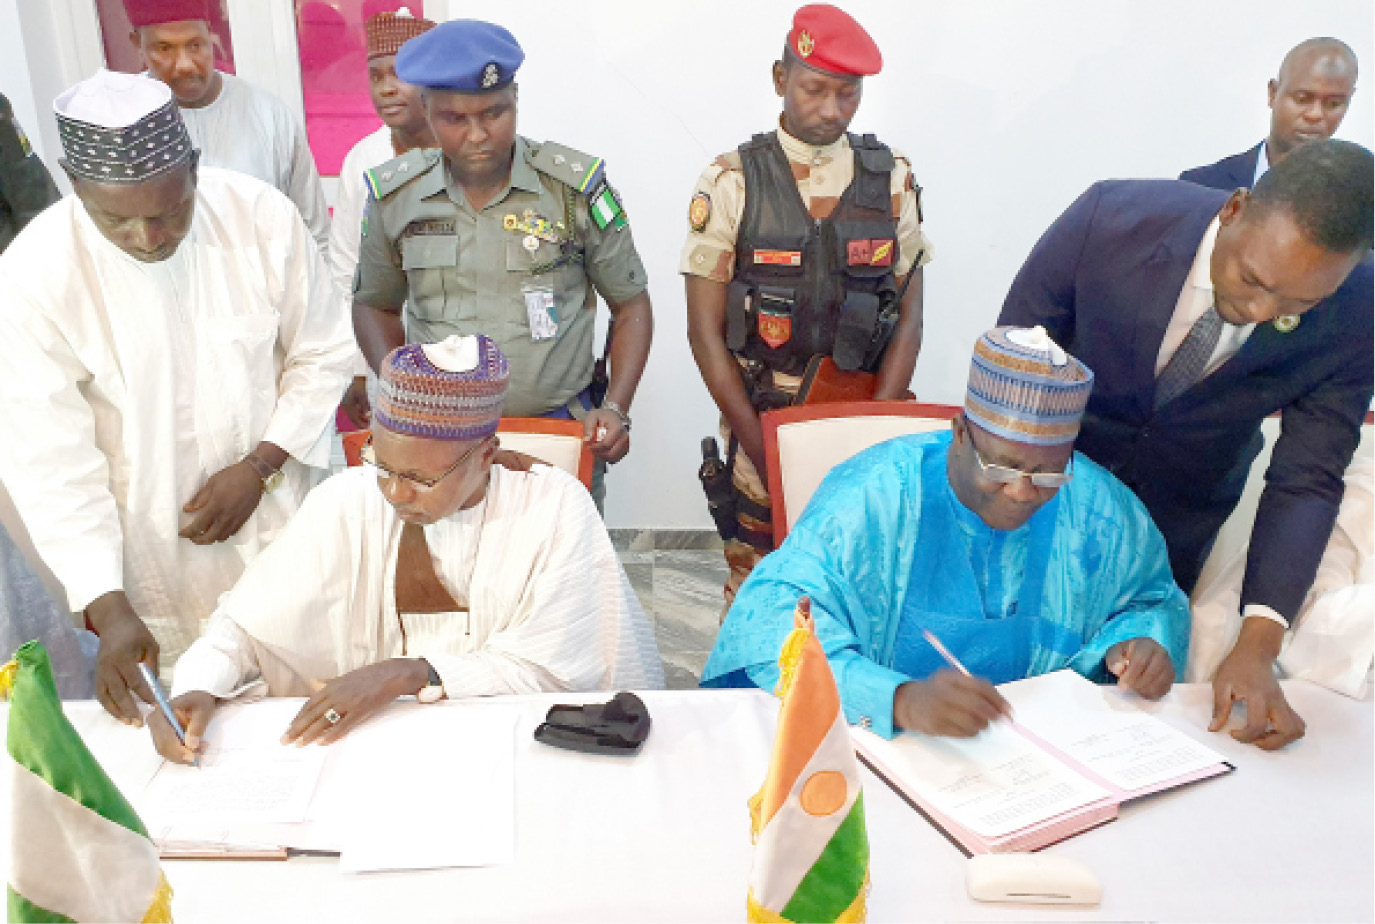 Governor Aminu Bello Masari of Katsina State (left) with Maradi Prefecture of Niger Republic, Alh. Zakari Umaru, during the signing of a communique at the end of their meeting on trans-border banditry in Maradi, Niger Republic yesterday. The governors of Sokoto and Zamfara States also signed the communique